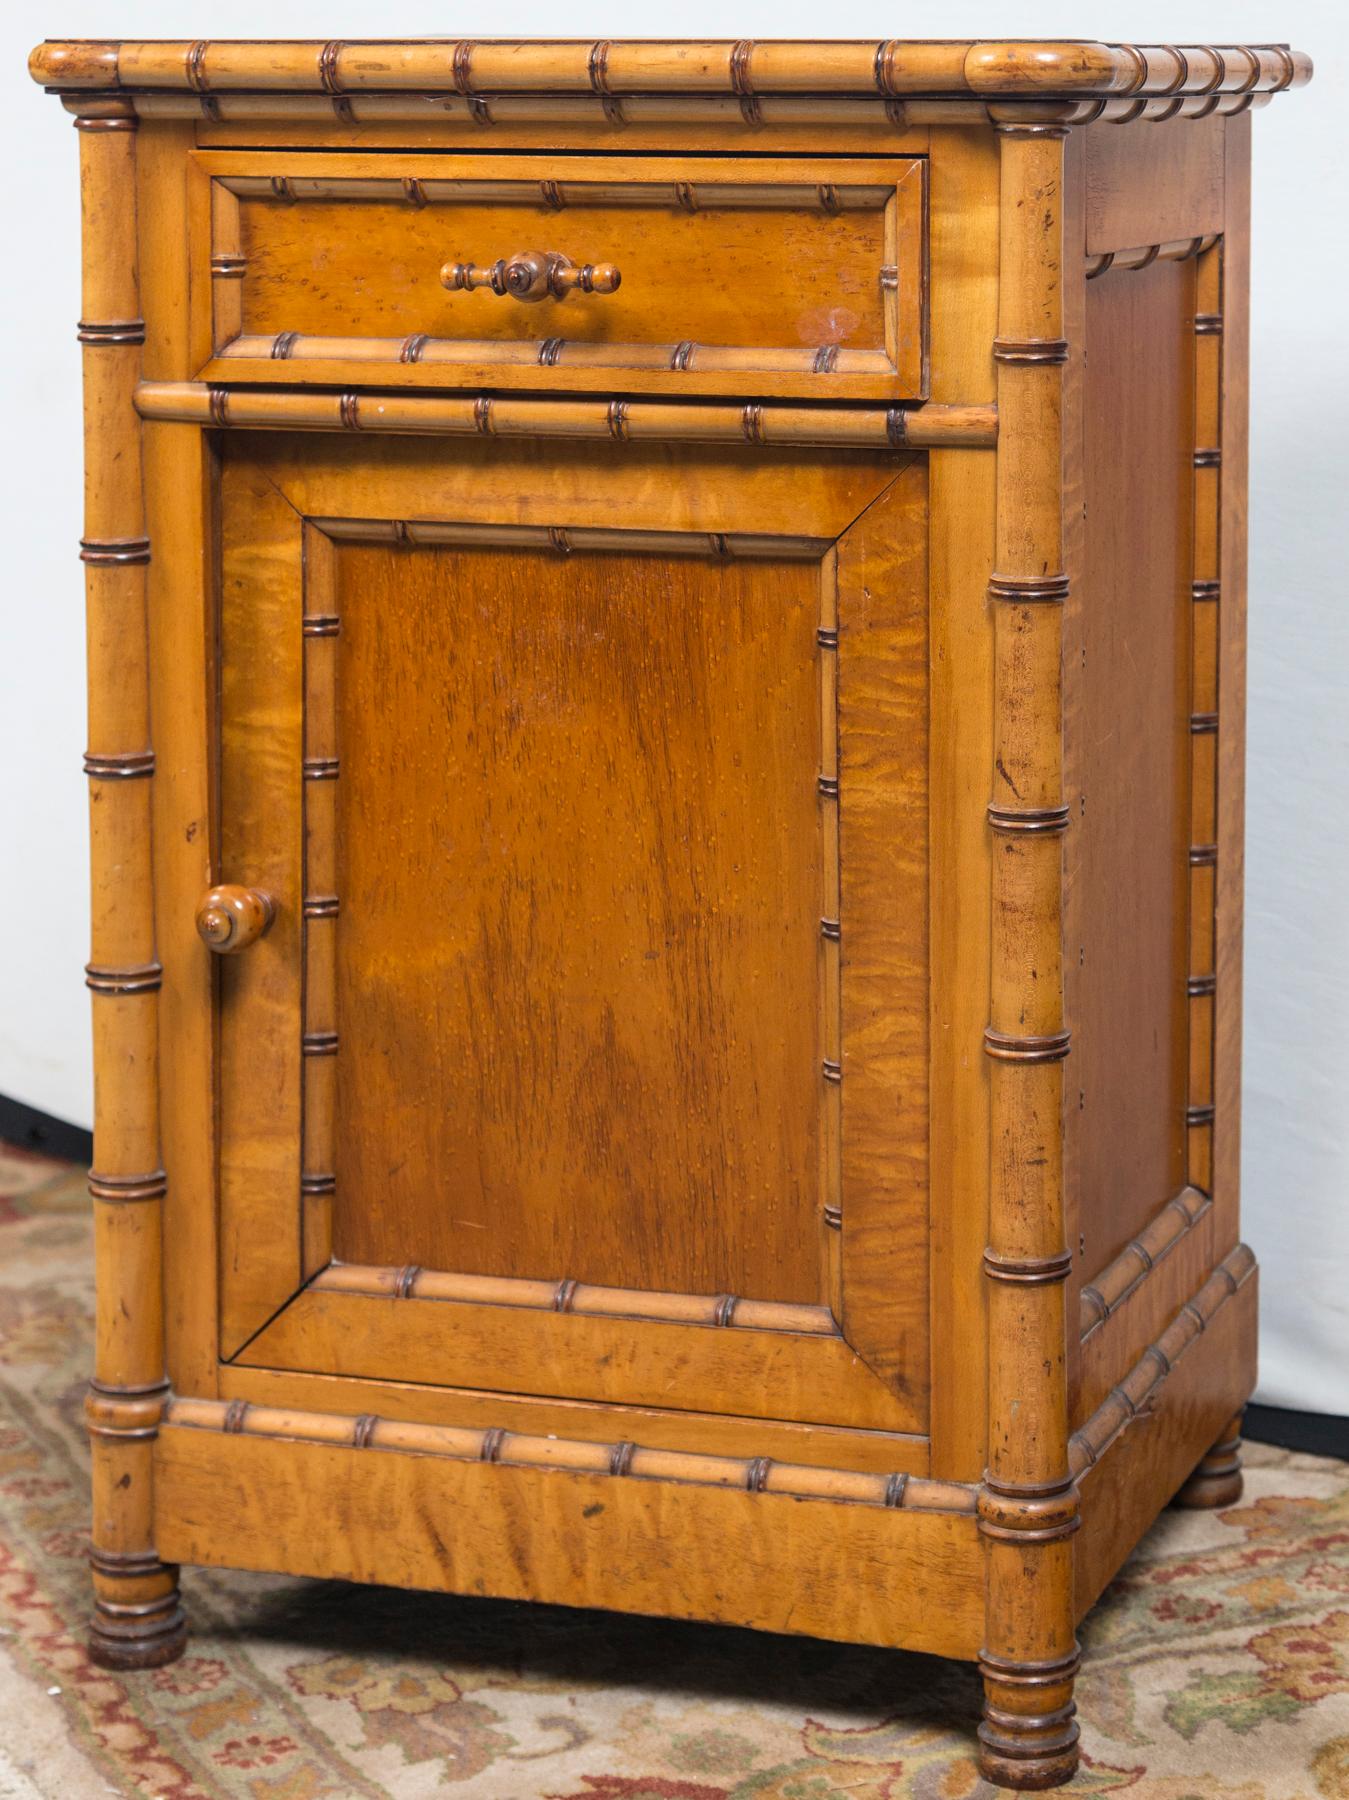 A very unique Victorian 19th century 5-piece bedroom set, circa 1890 or earlier the complete set is made of bird's-eye
maple. All hardware is intact and original. Set consists of full-sized bed, nightstand, tall gentleman's chest of drawers, lady's